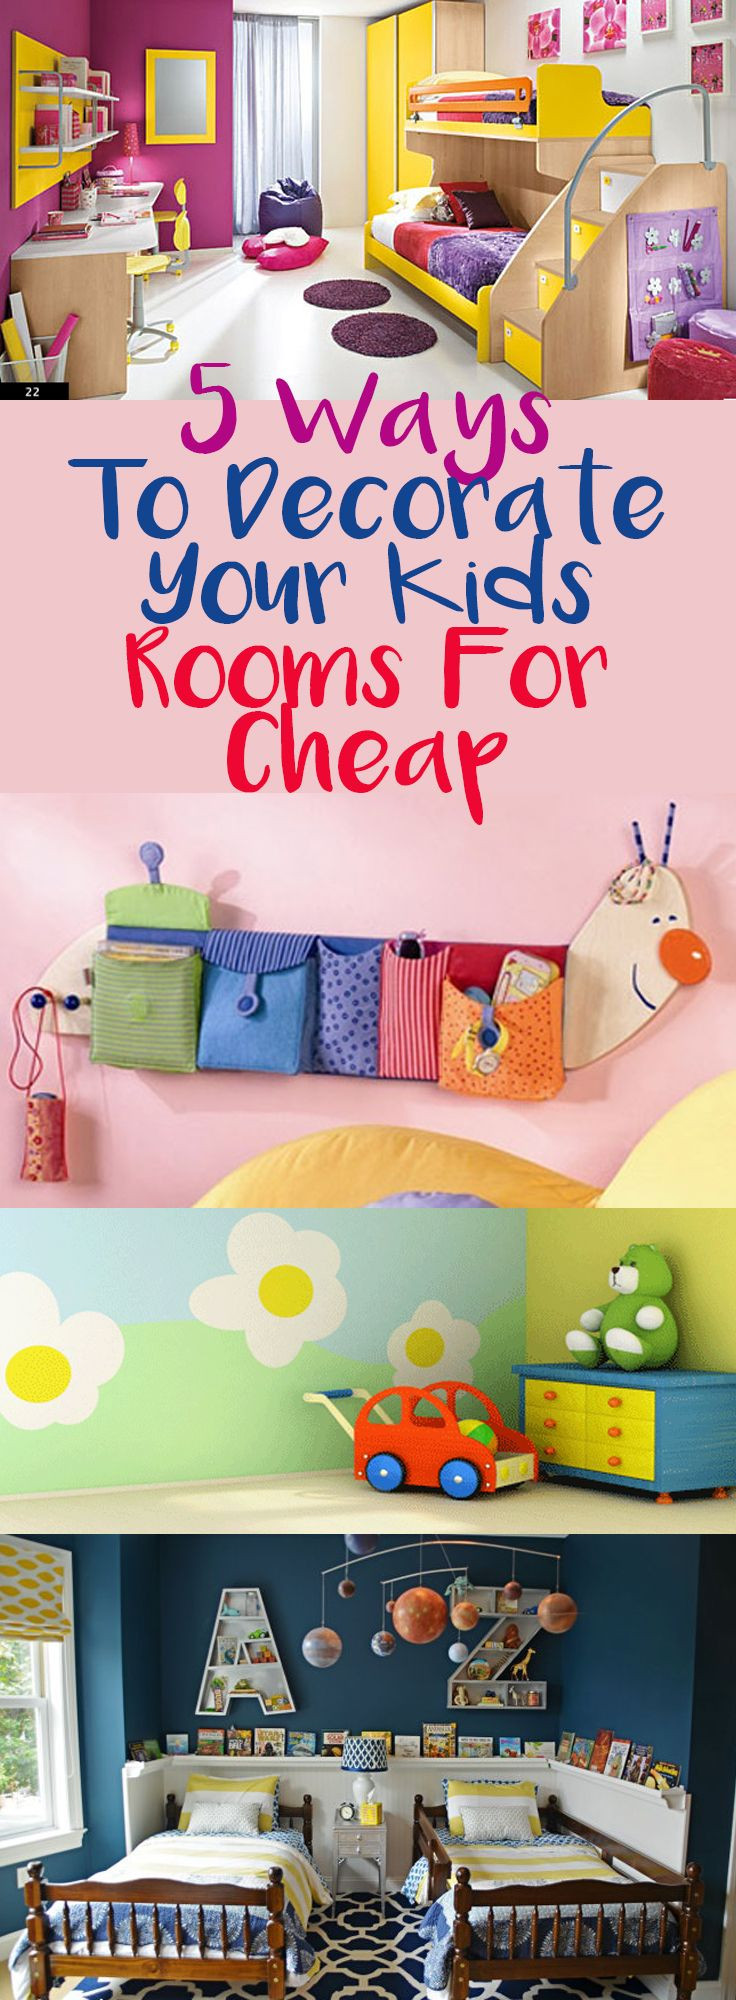 Cheap Kids Room Decor
 5 Ways To Decorate Your Kids Rooms For Cheap